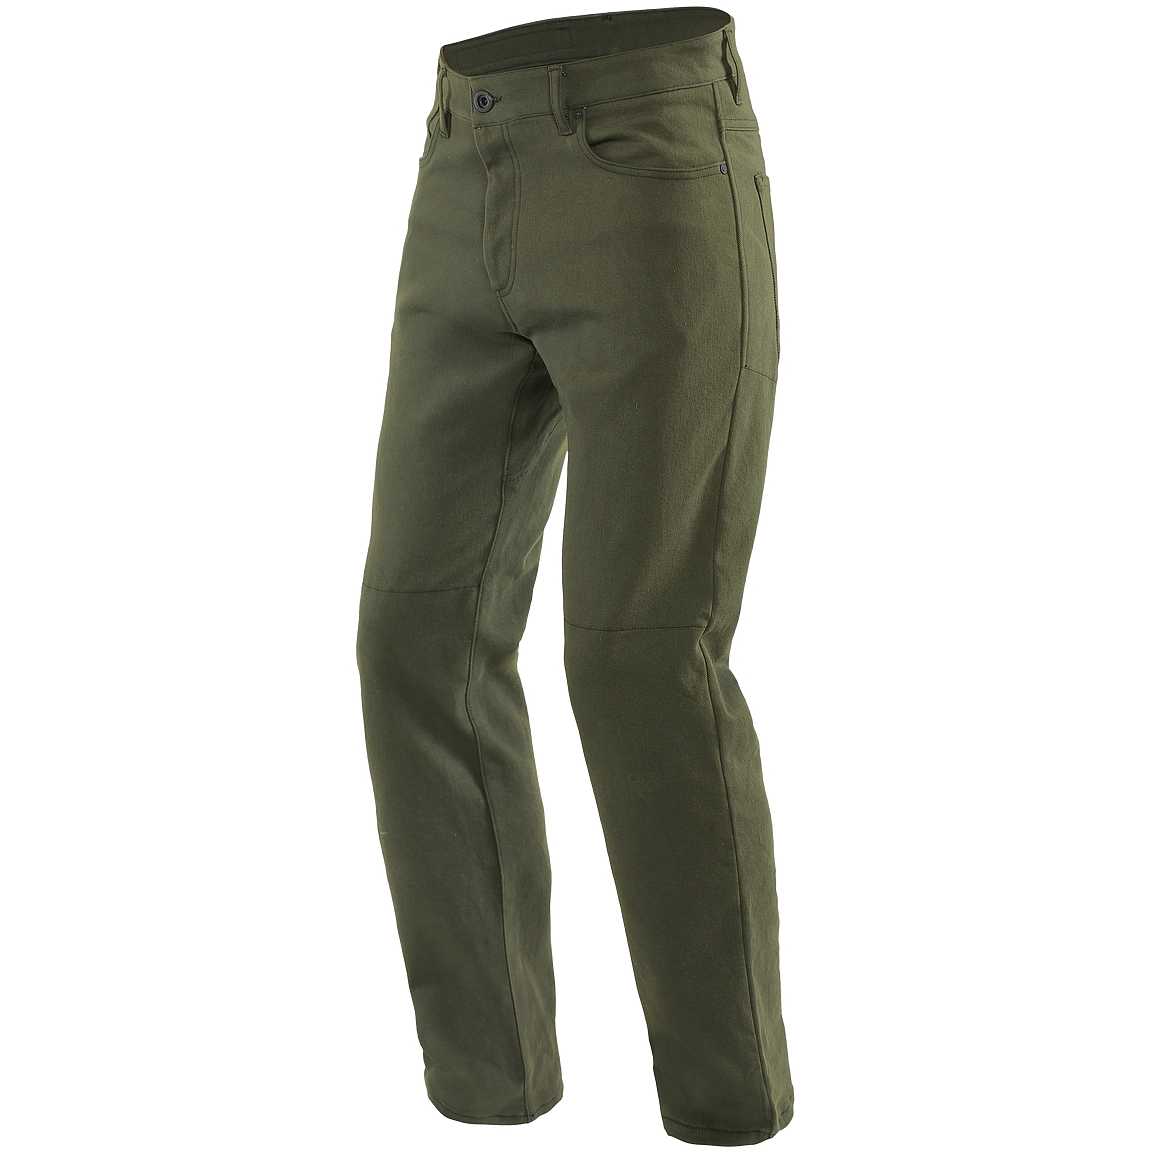 Dainese CASUAL REGULAR Jeans Motorcycle Pants Olive Green For Sale ...